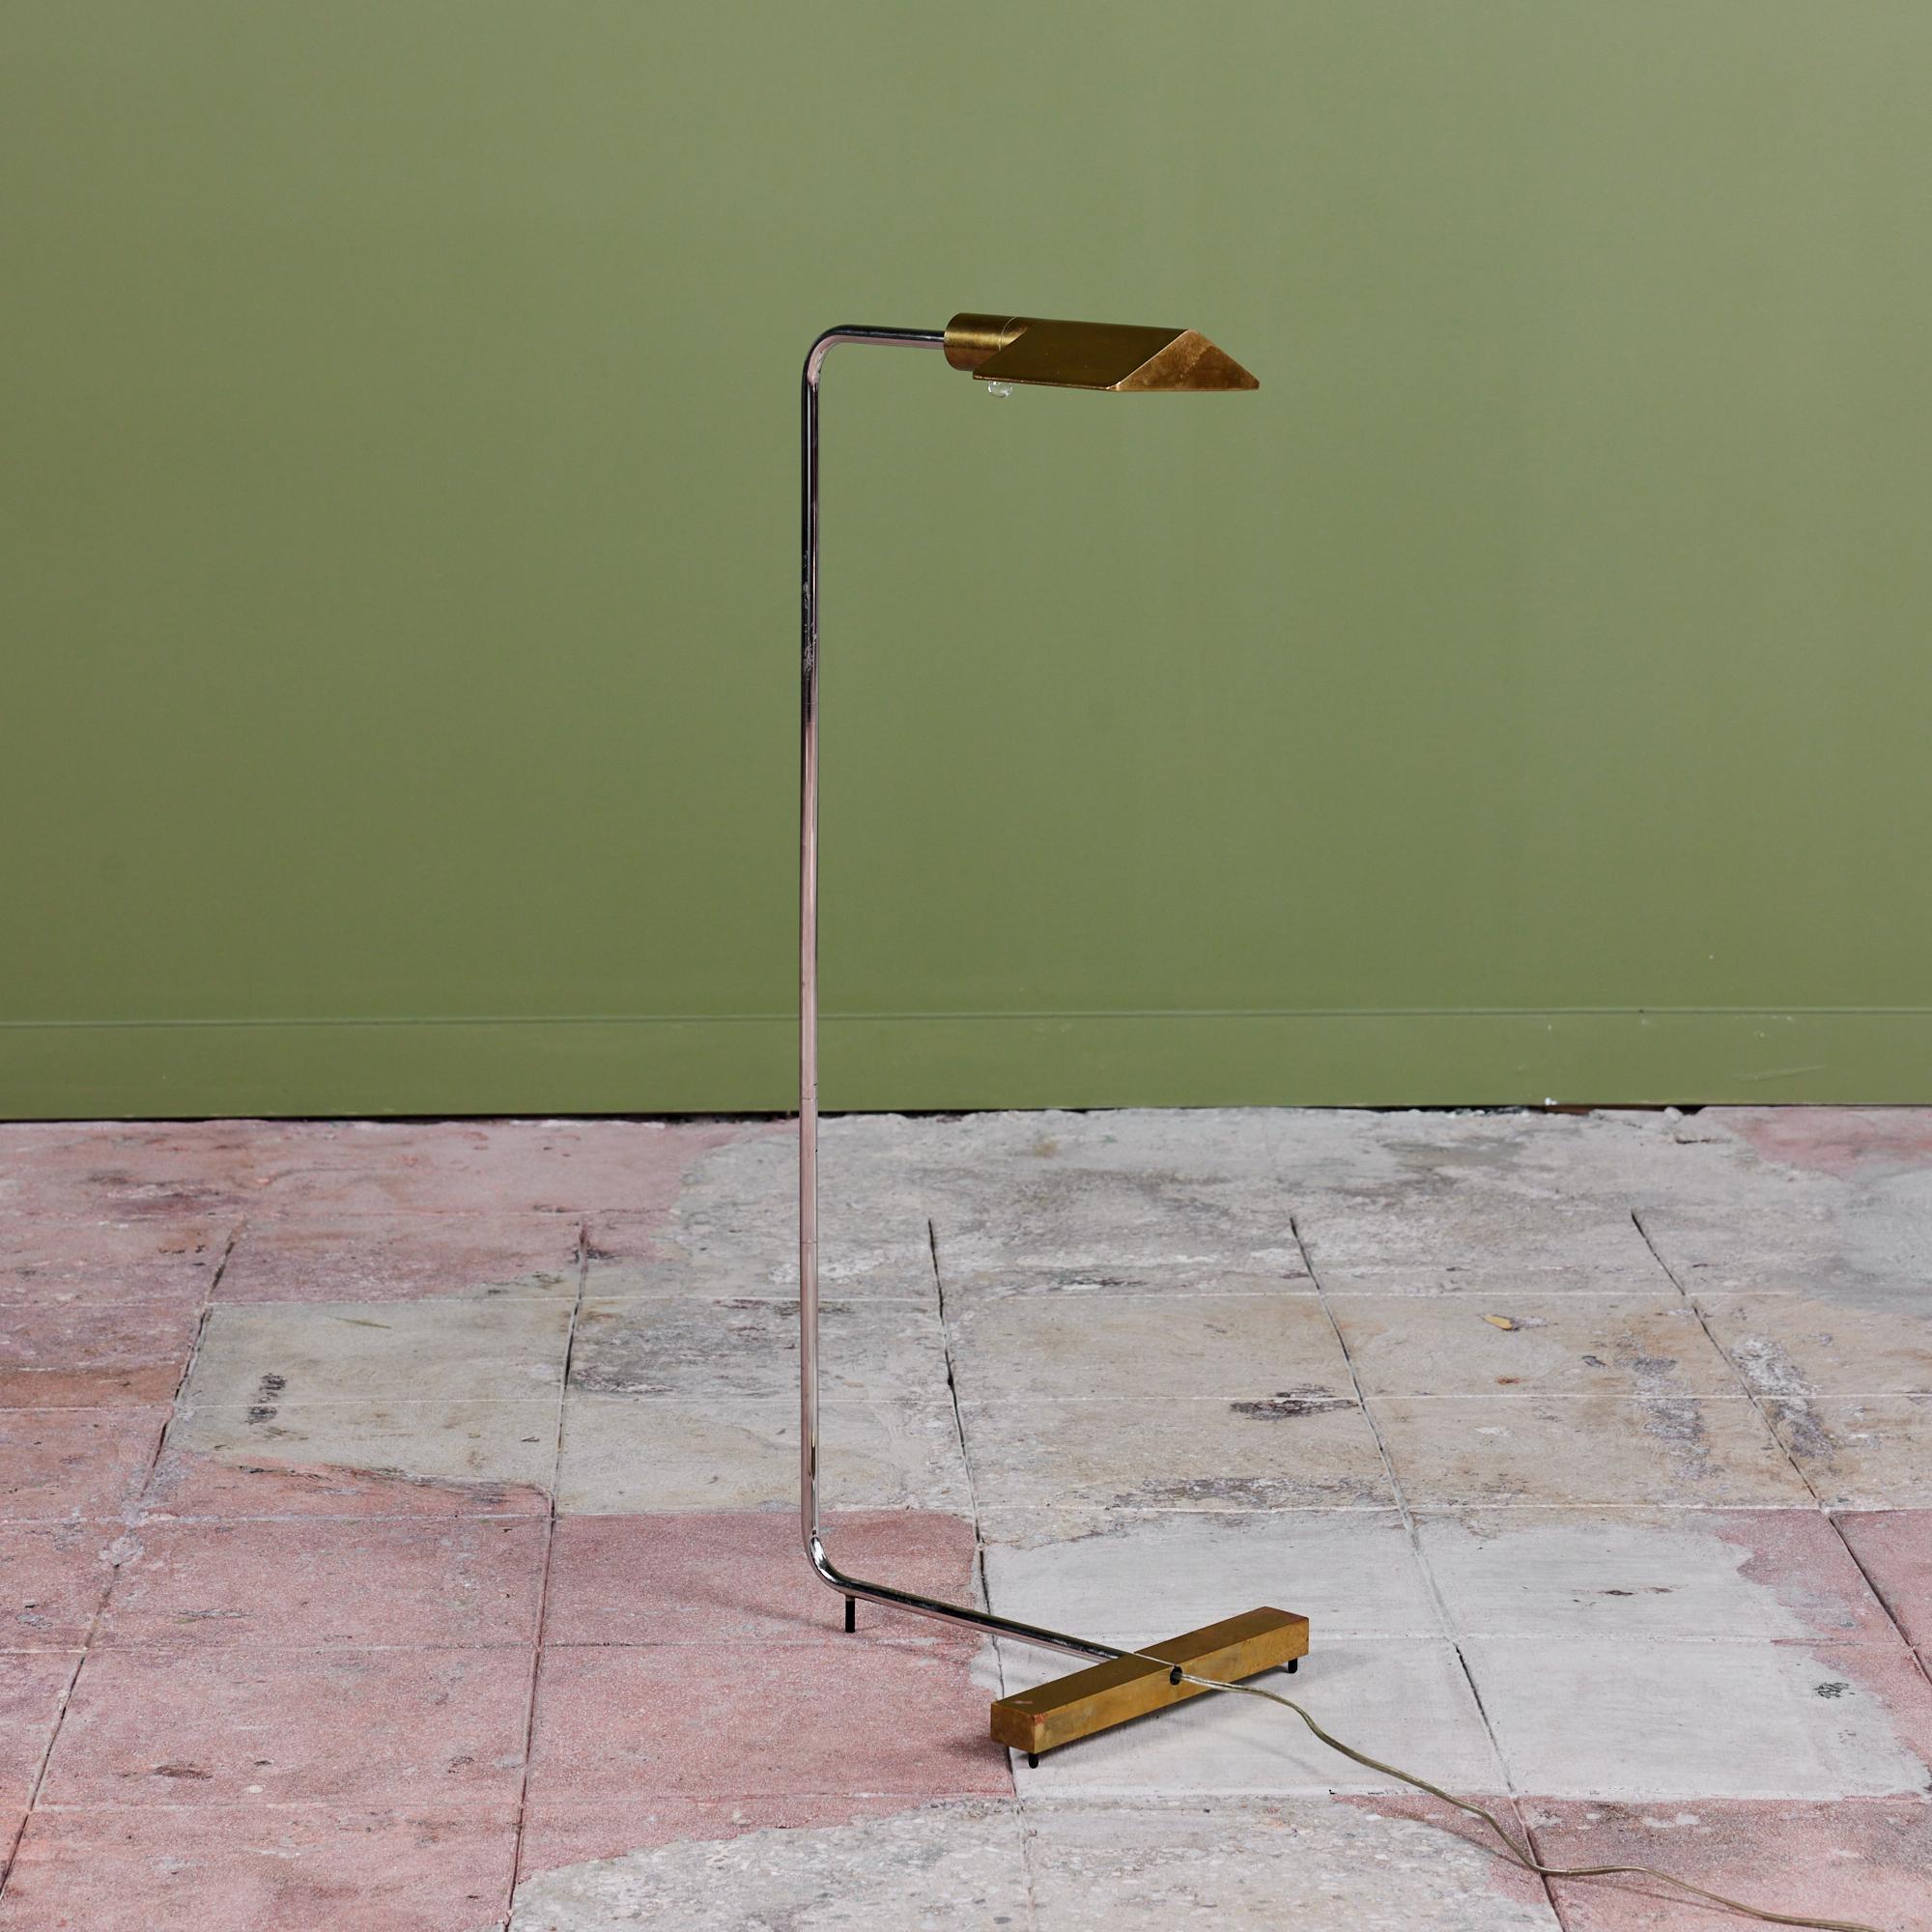 Designed in the 1970s, this brass and stainless steel floor lamp by Cedric Hartman is an enduring design classic. The modernist floor lamp features a triangular brass shade attached to a curved stainless steel stem that offer focused task lighting.